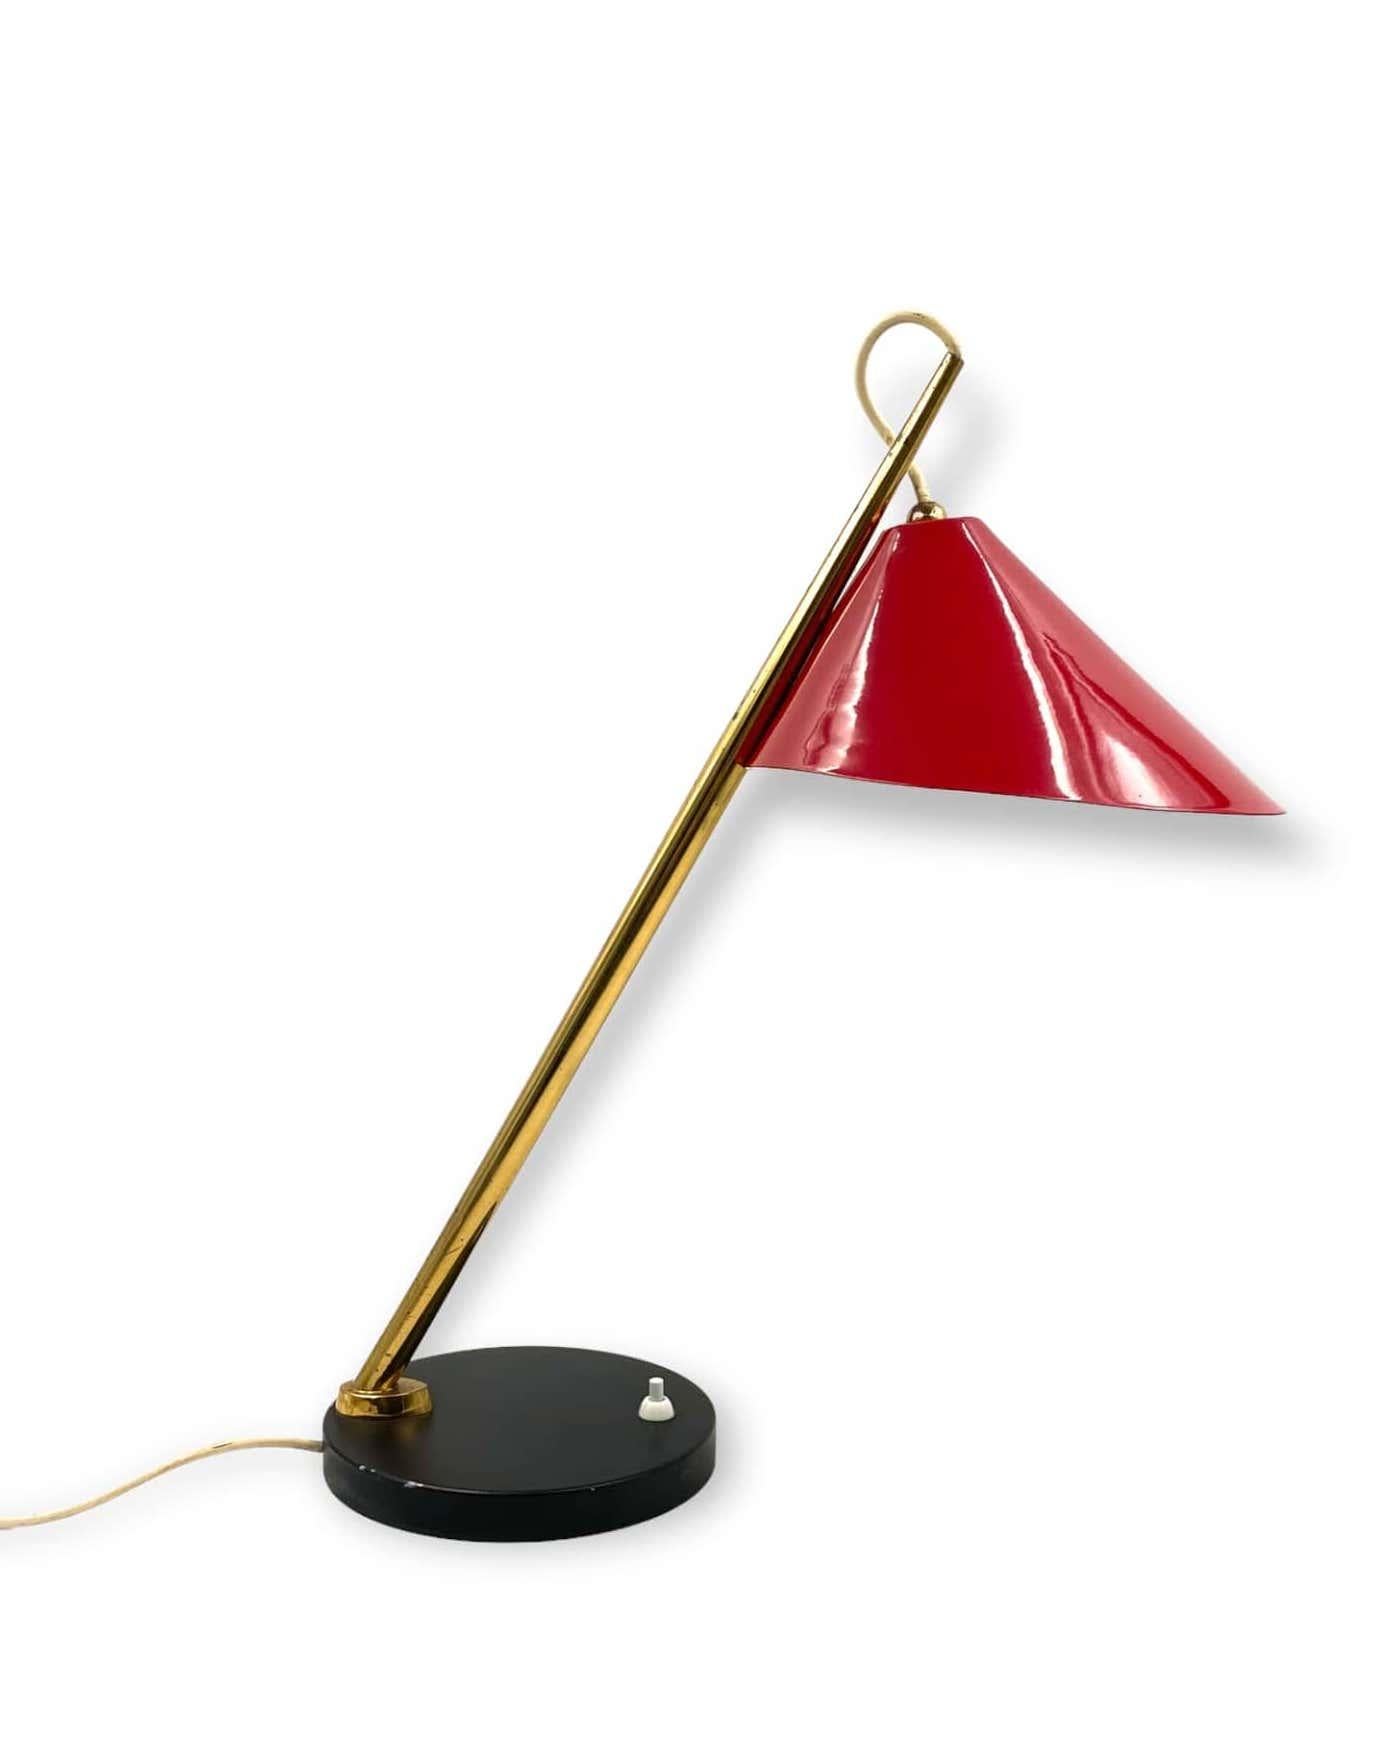 Midcentury Red Table Lamp, Lumen, Italy, 1960s For Sale 1